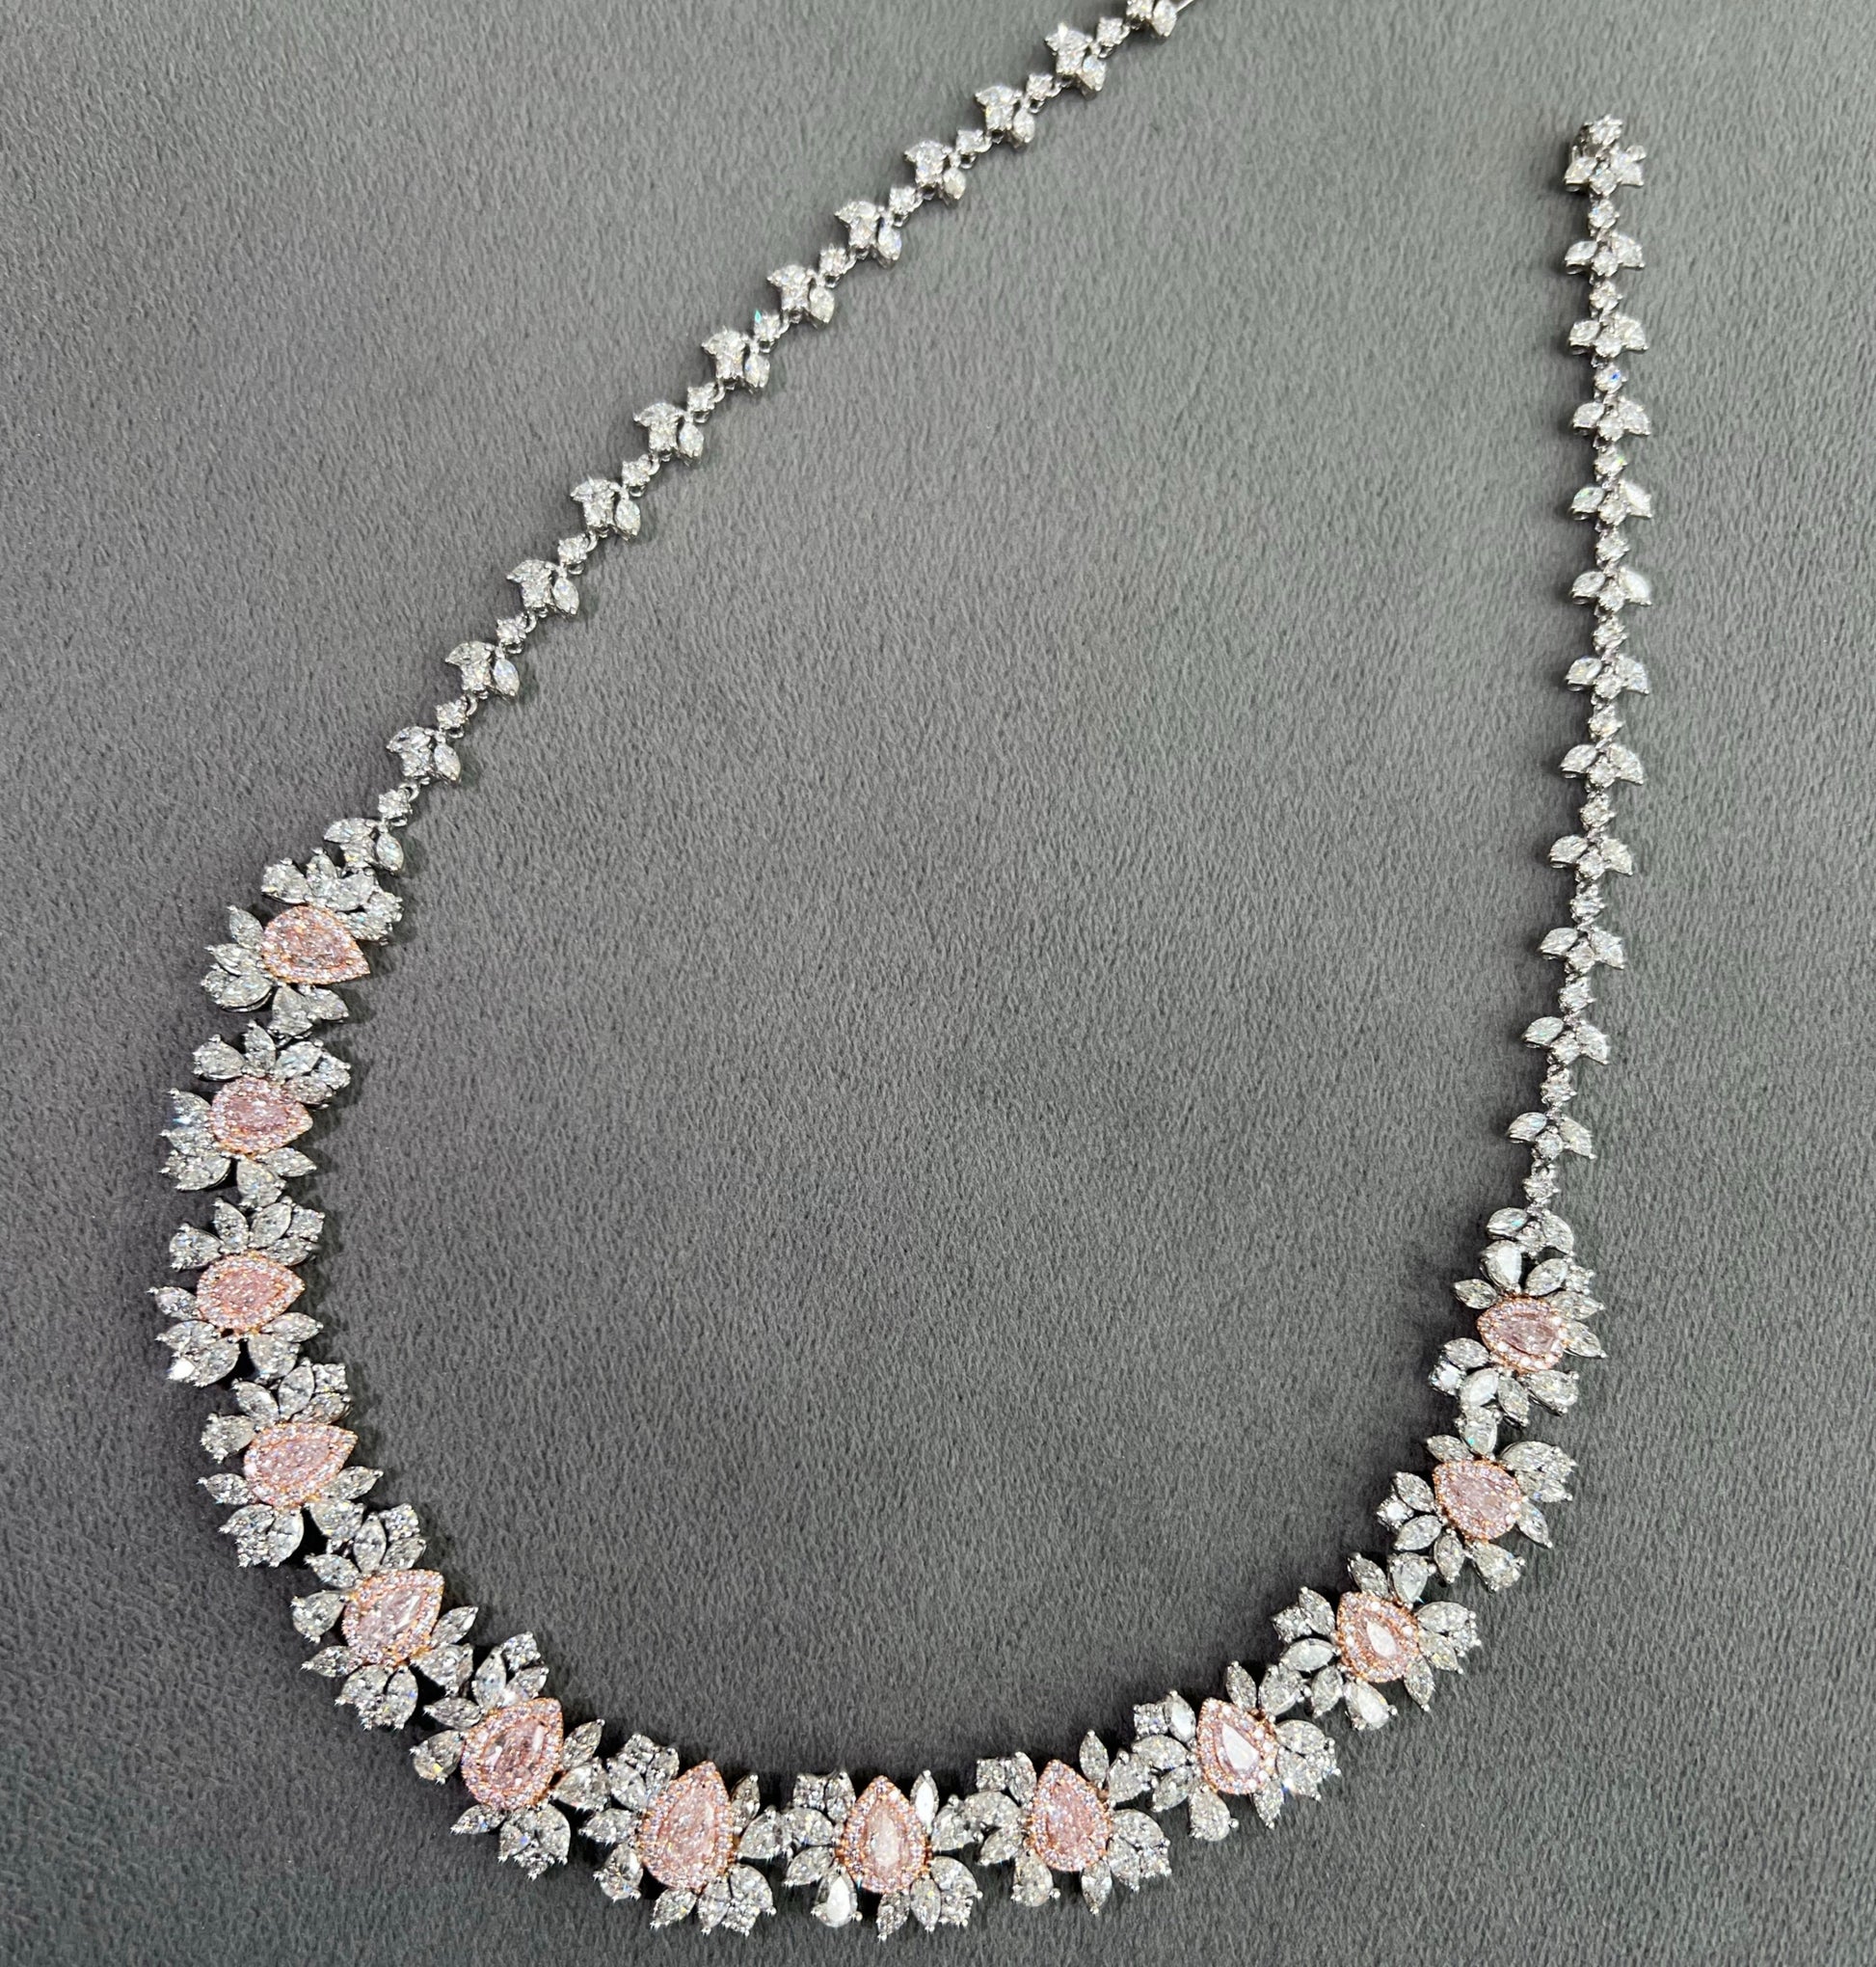 Red carpet pink diamond necklace. Natural fancy pink diamond necklace. Fancy pink diamond jewelry. Pink diamond jewelry. Gia certified pink diamonds